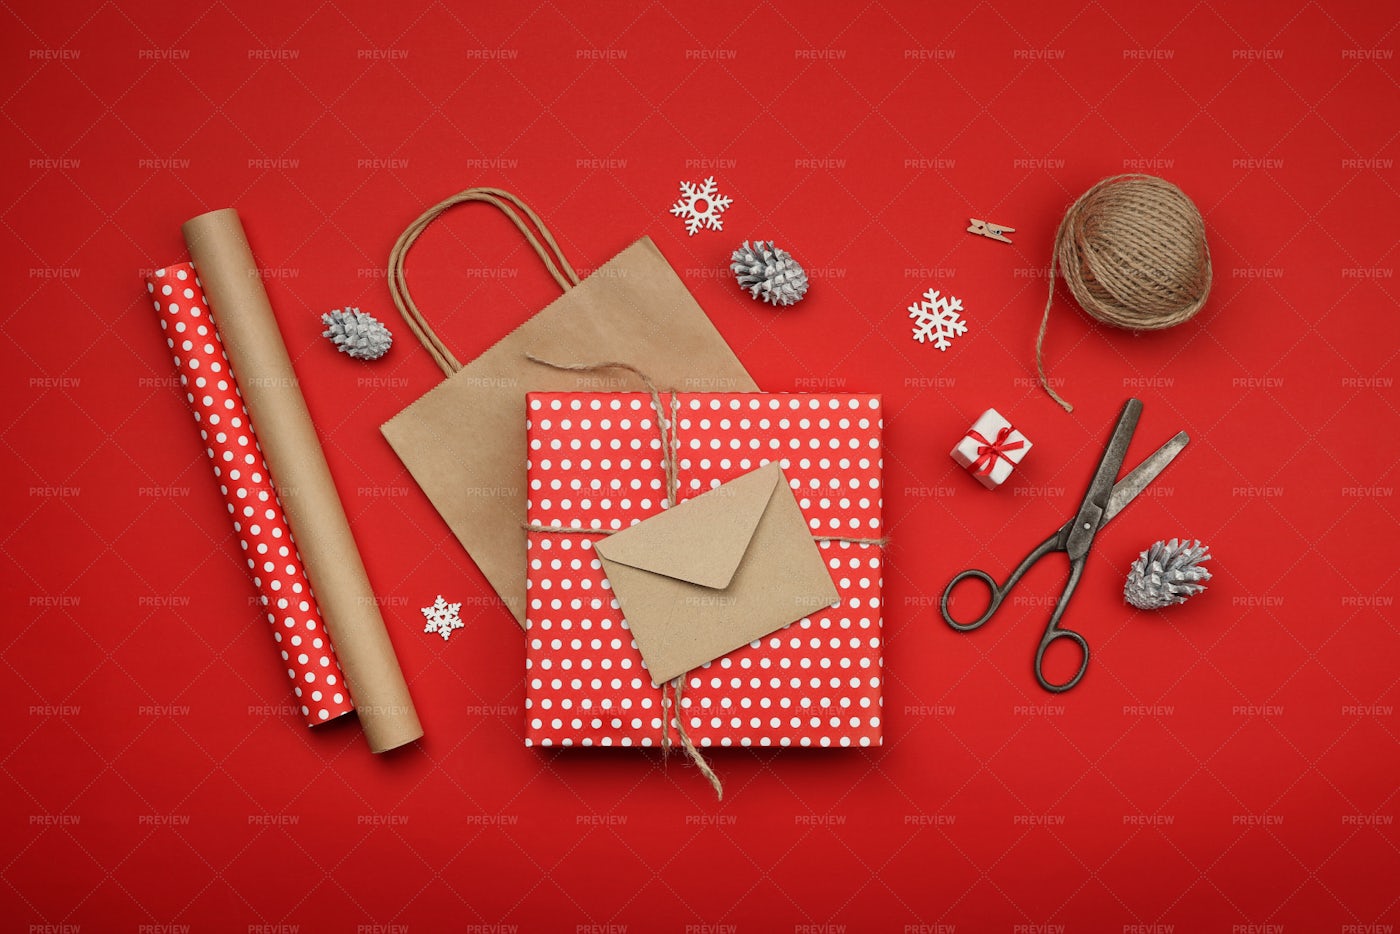 Packing Christmas Gifts: Stock Photos